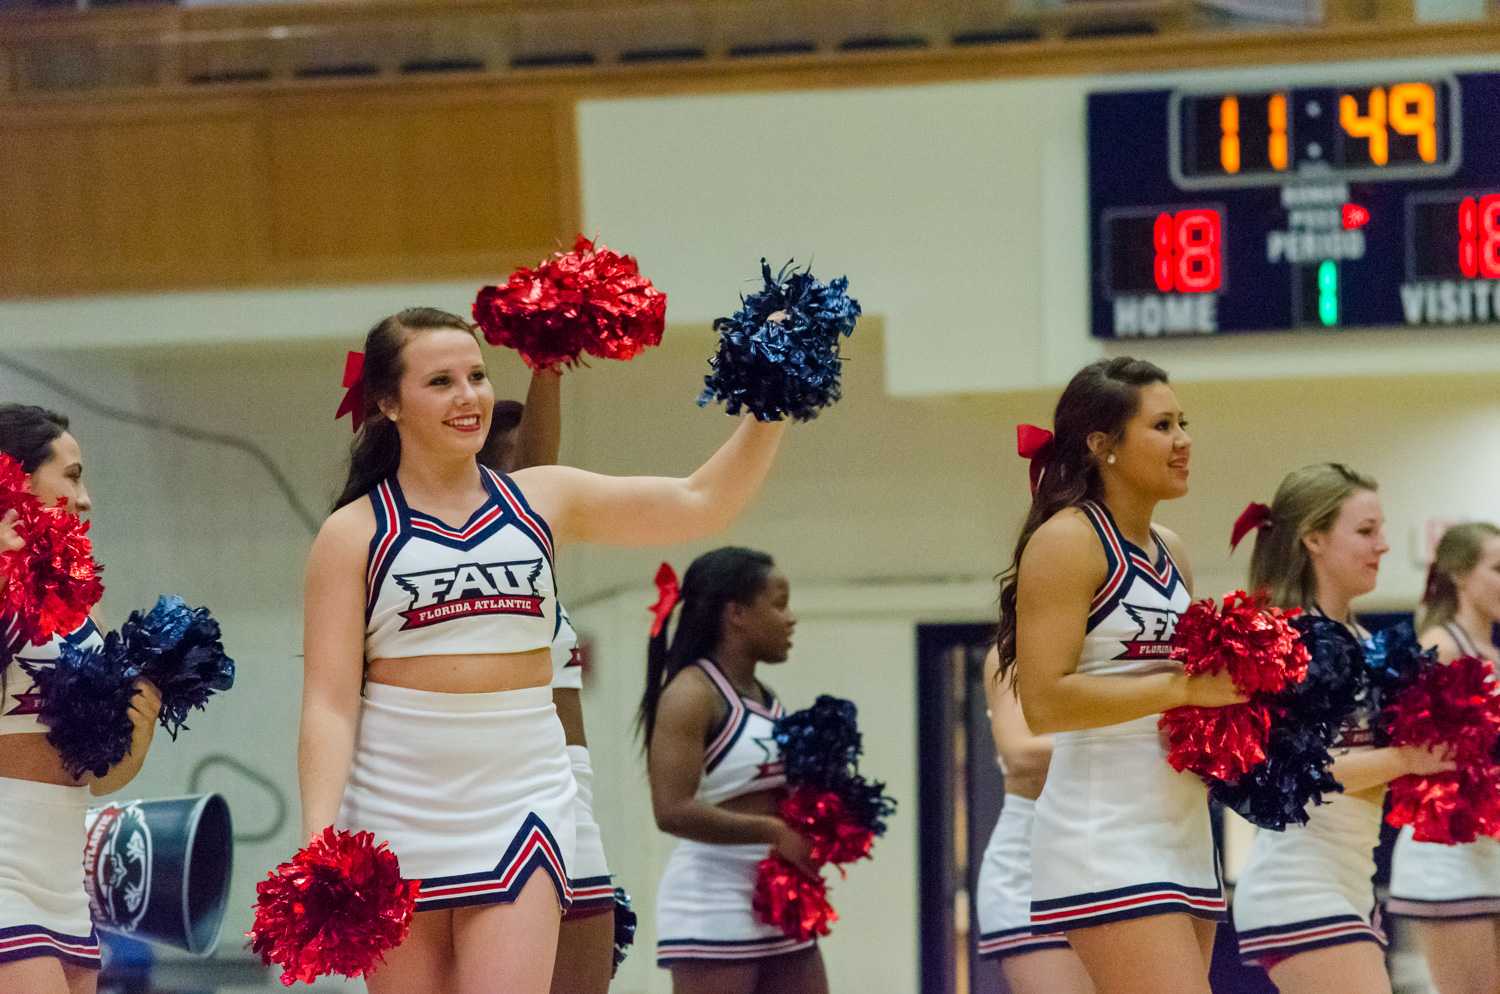 The FAU Cheerleaders helped to cheer the Owls to a ten point victory (66-56) over UAB. 